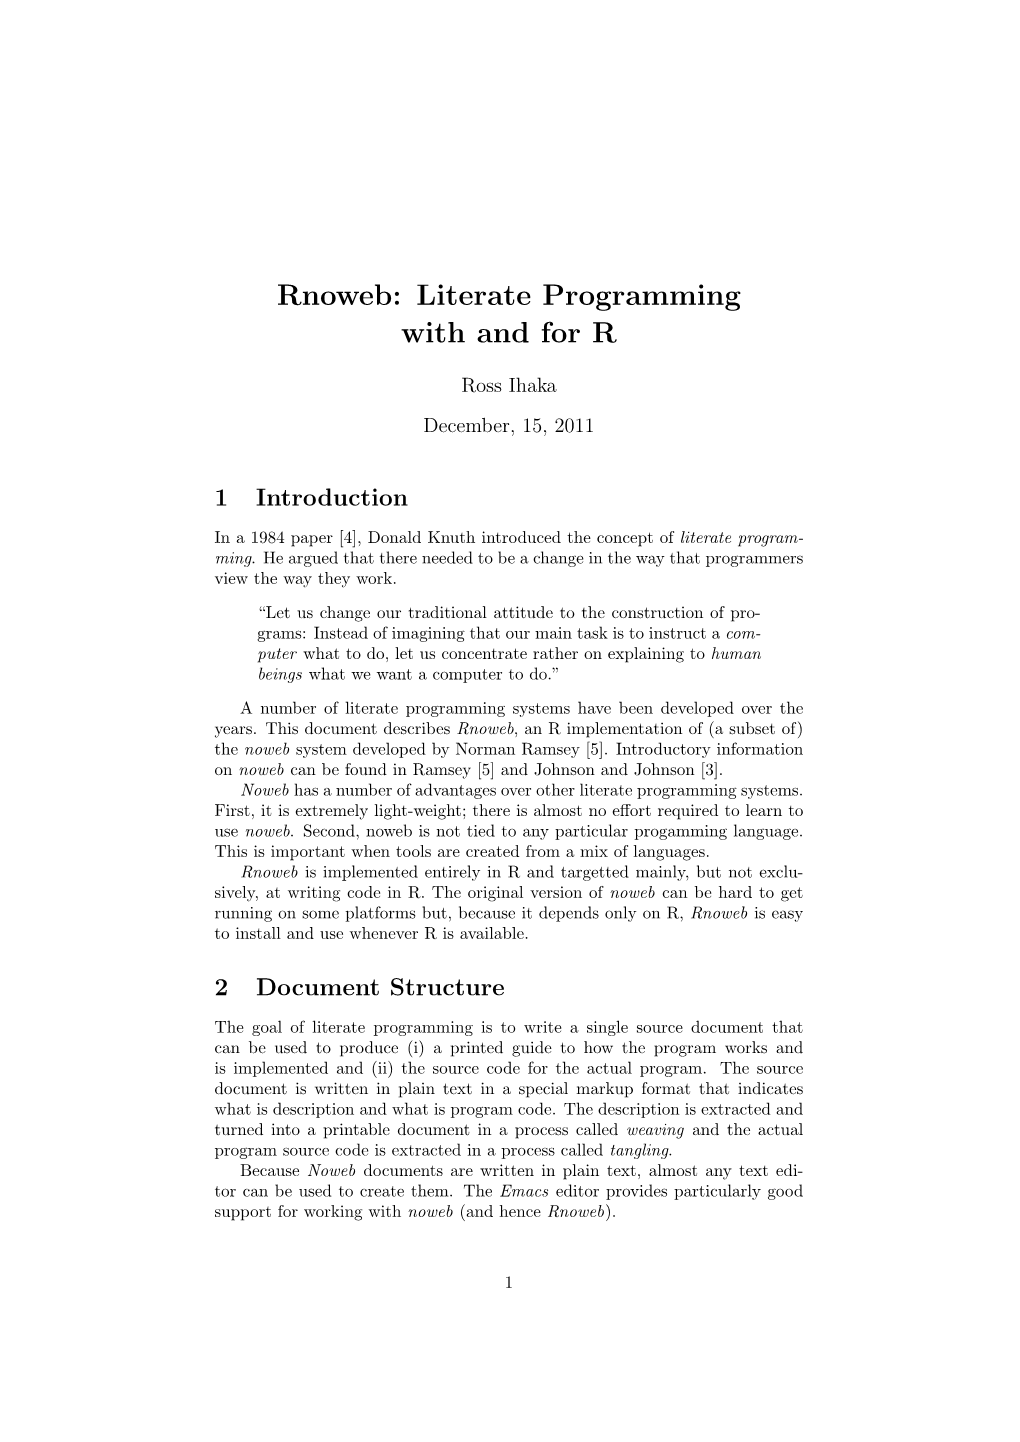 Rnoweb: Literate Programming with and for R